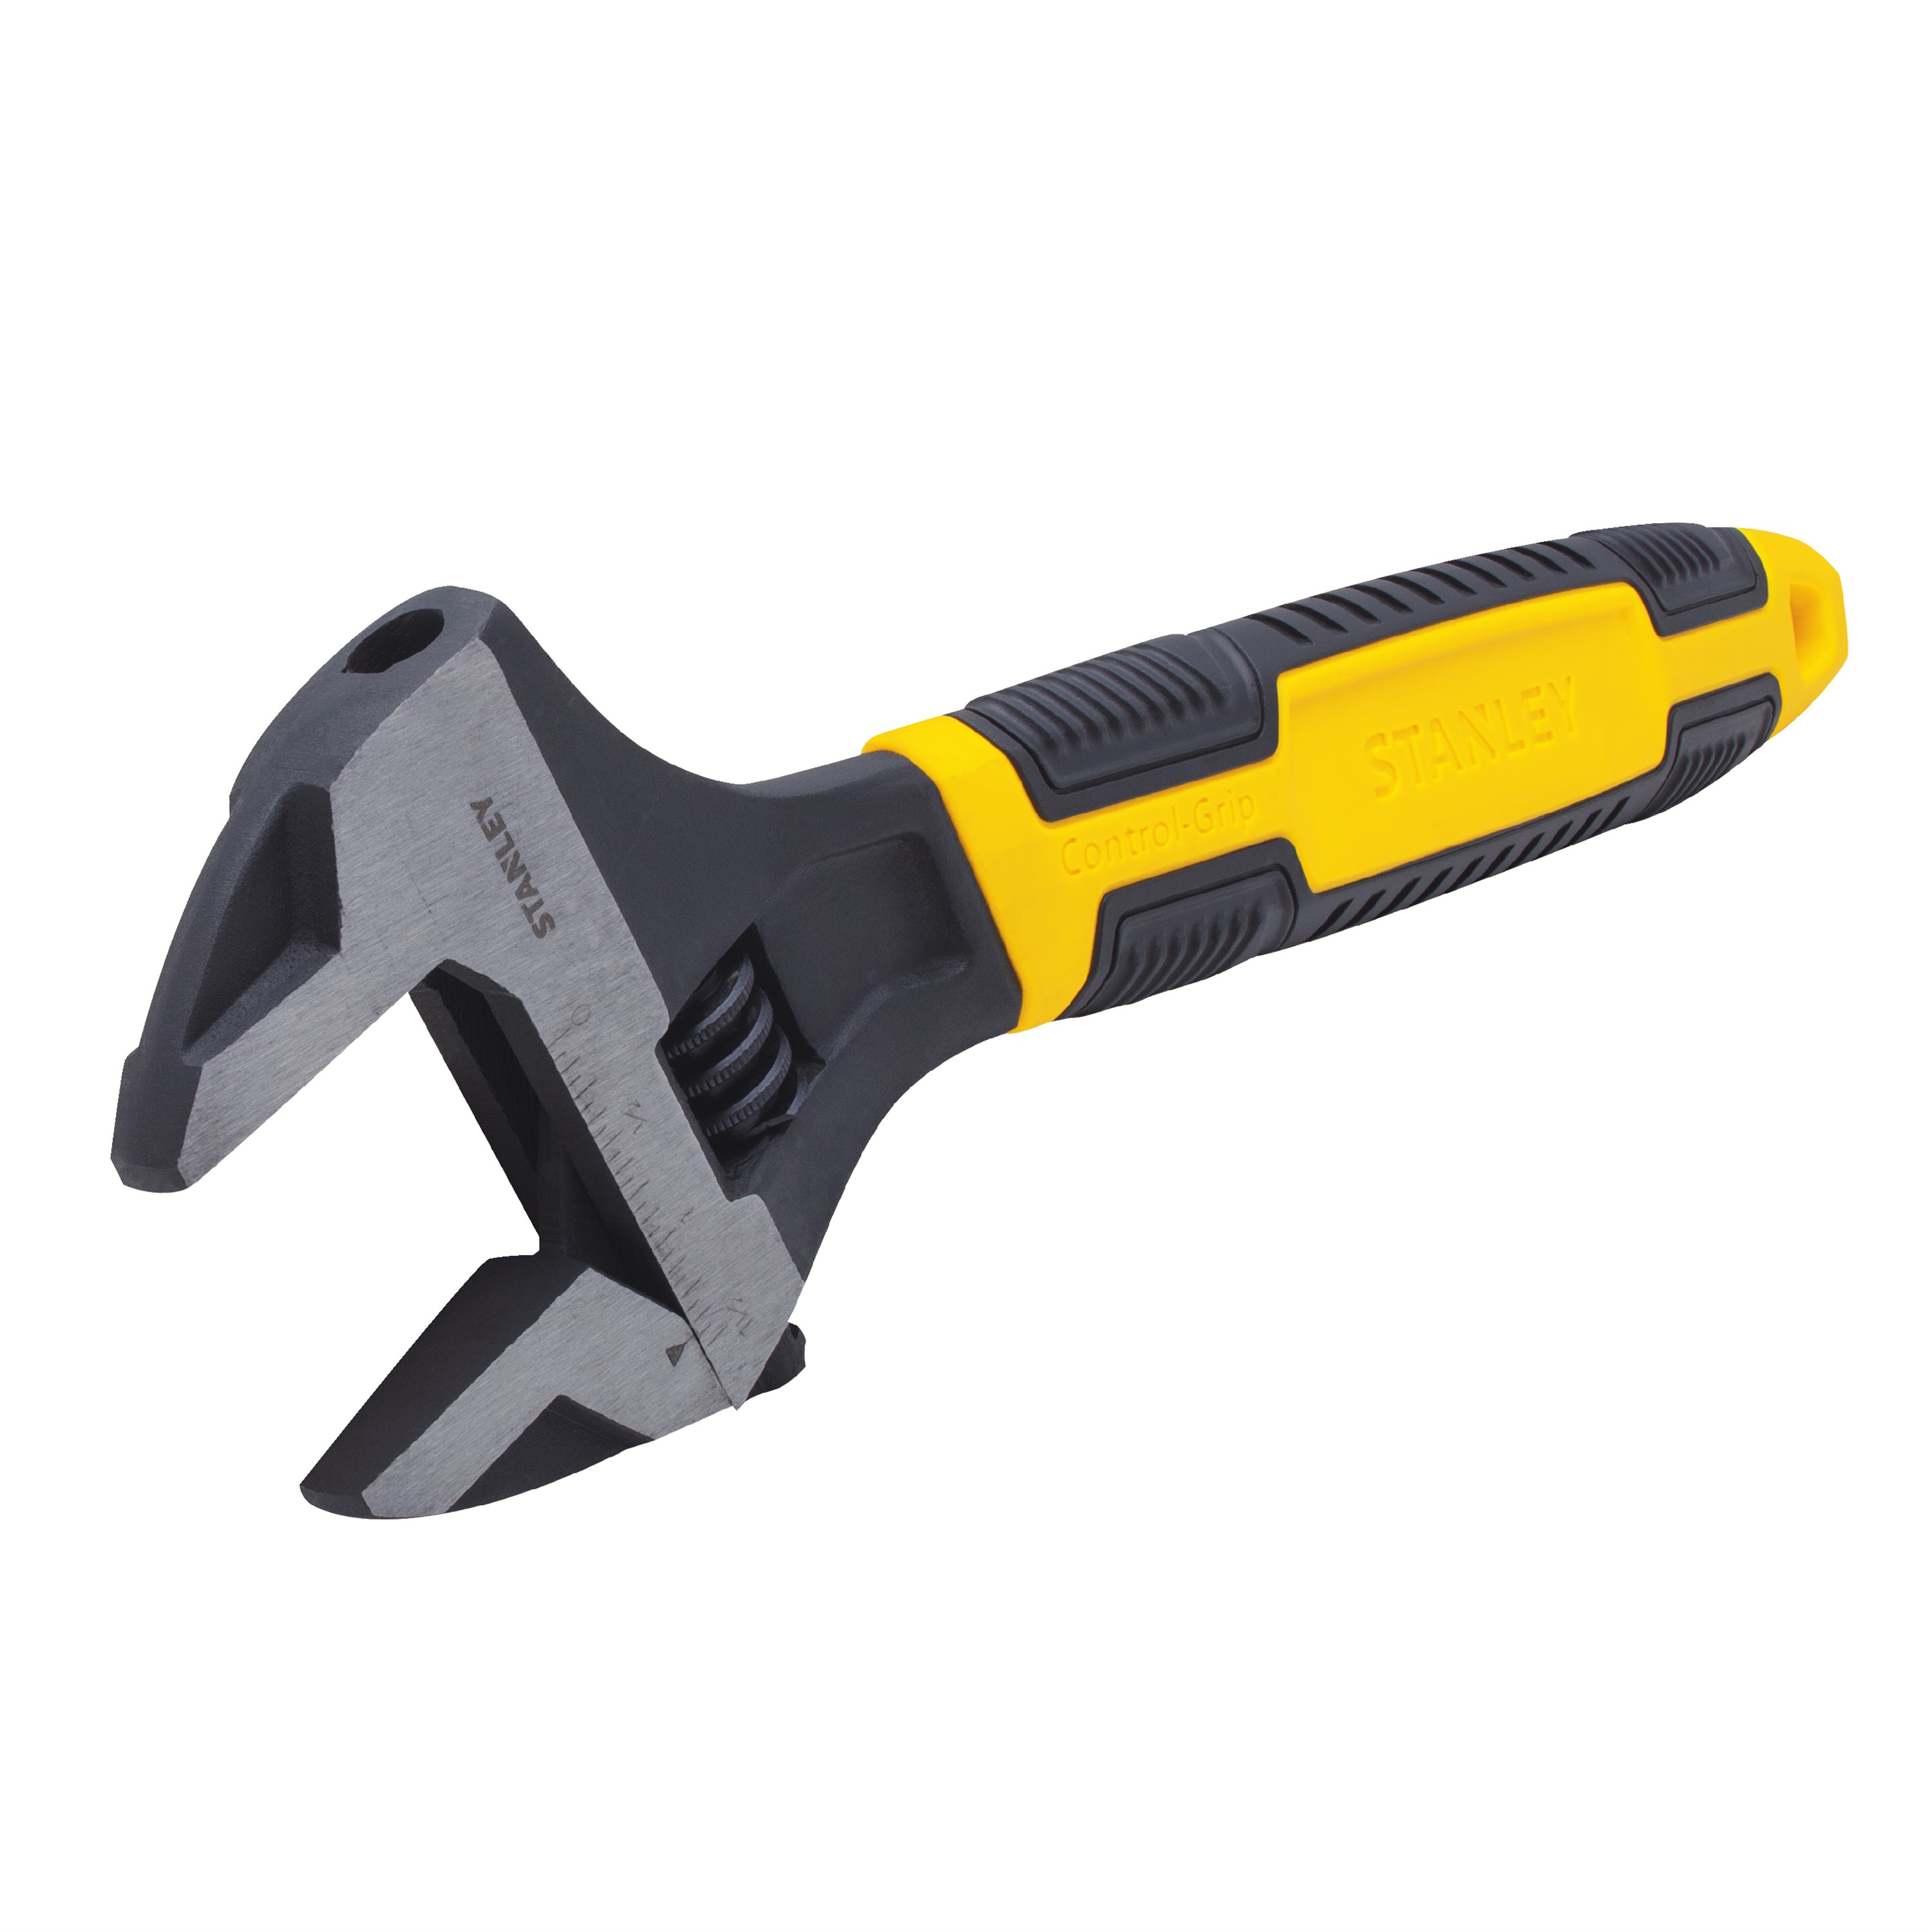 STANLEY 90-950 12" Adjustable Wrench - image 2 of 3